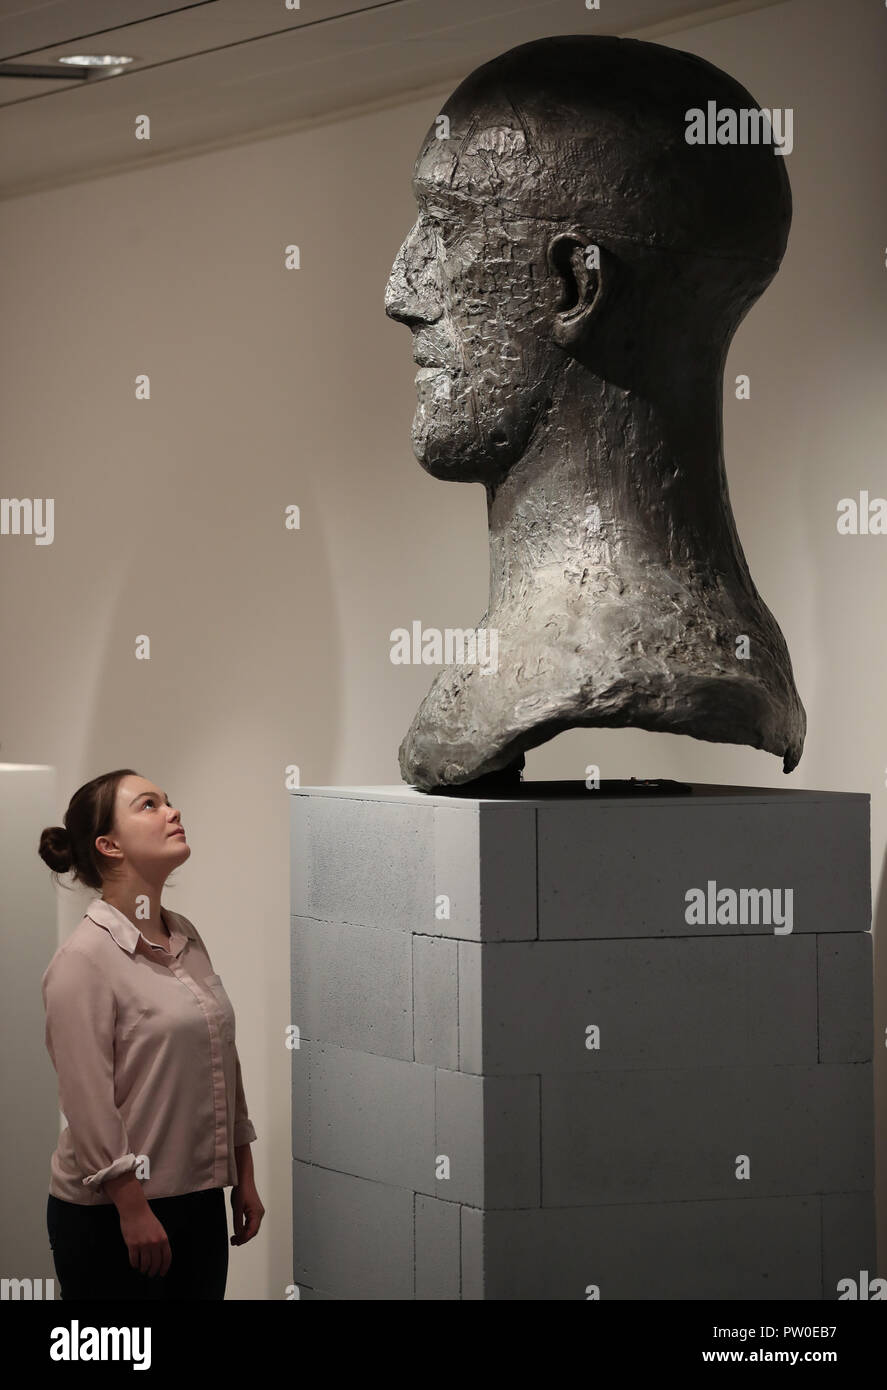 A visitor looks at a Tribute Head on display at the Elisabeth Frink Humans and Other Animals exhibition preview at the Sainsbury Centre for Visual Arts in Norwich, Norfolk. PRESS ASSOCIATION Photo. Picture date: Thursday October 11, 2018. The exhibition will provide new perspectives and examine her radical and bohemian beginnings in 1950s London, reappraising one of the most important British sculptors of the twentieth century. Photo credit should read: Chris Radburn/PA Wire Stock Photo